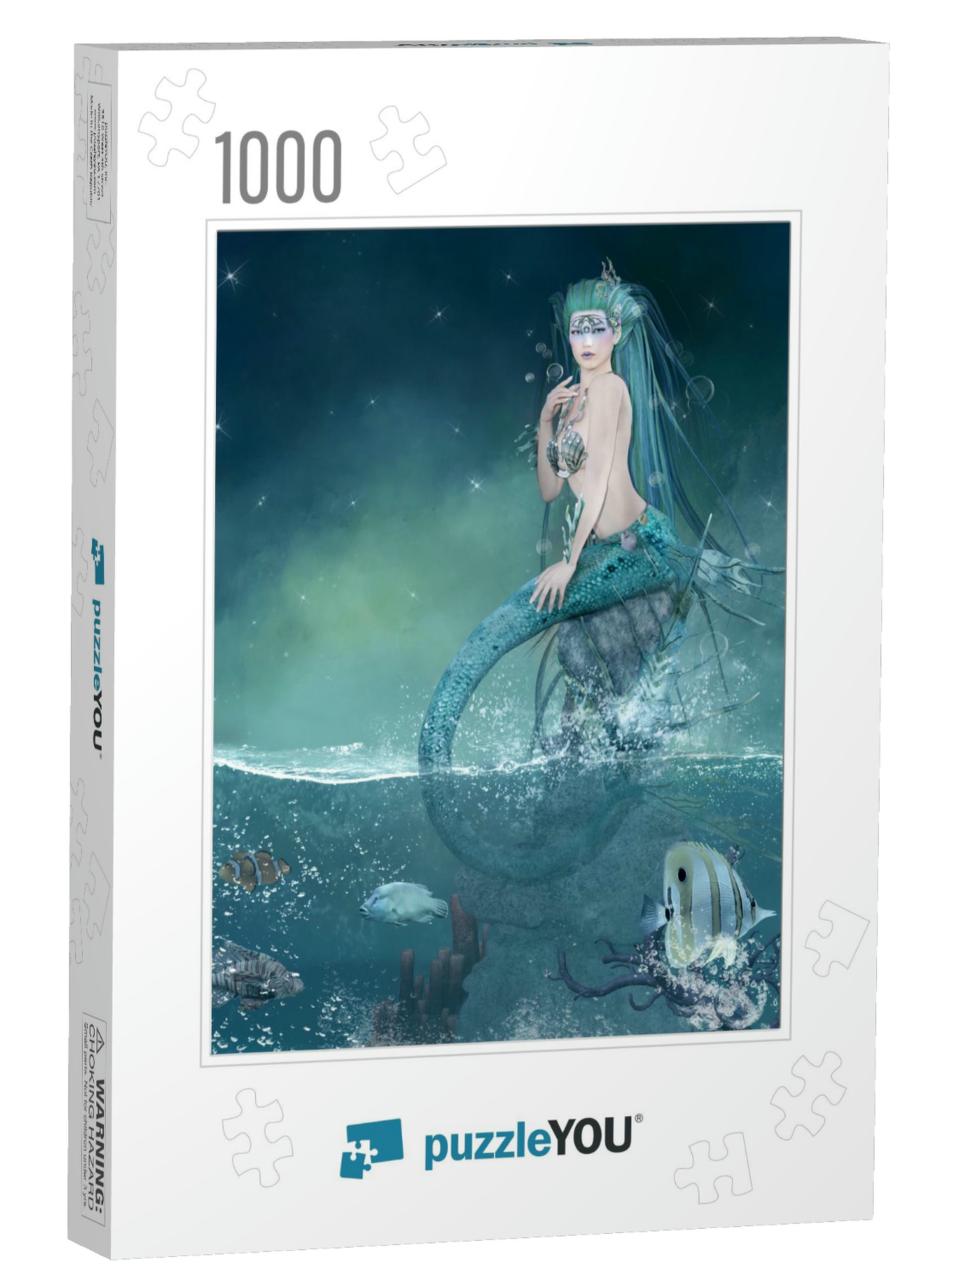 Mermaid Over a Rock in a Fantasy Seascape Scenery - 3D Il... Jigsaw Puzzle with 1000 pieces